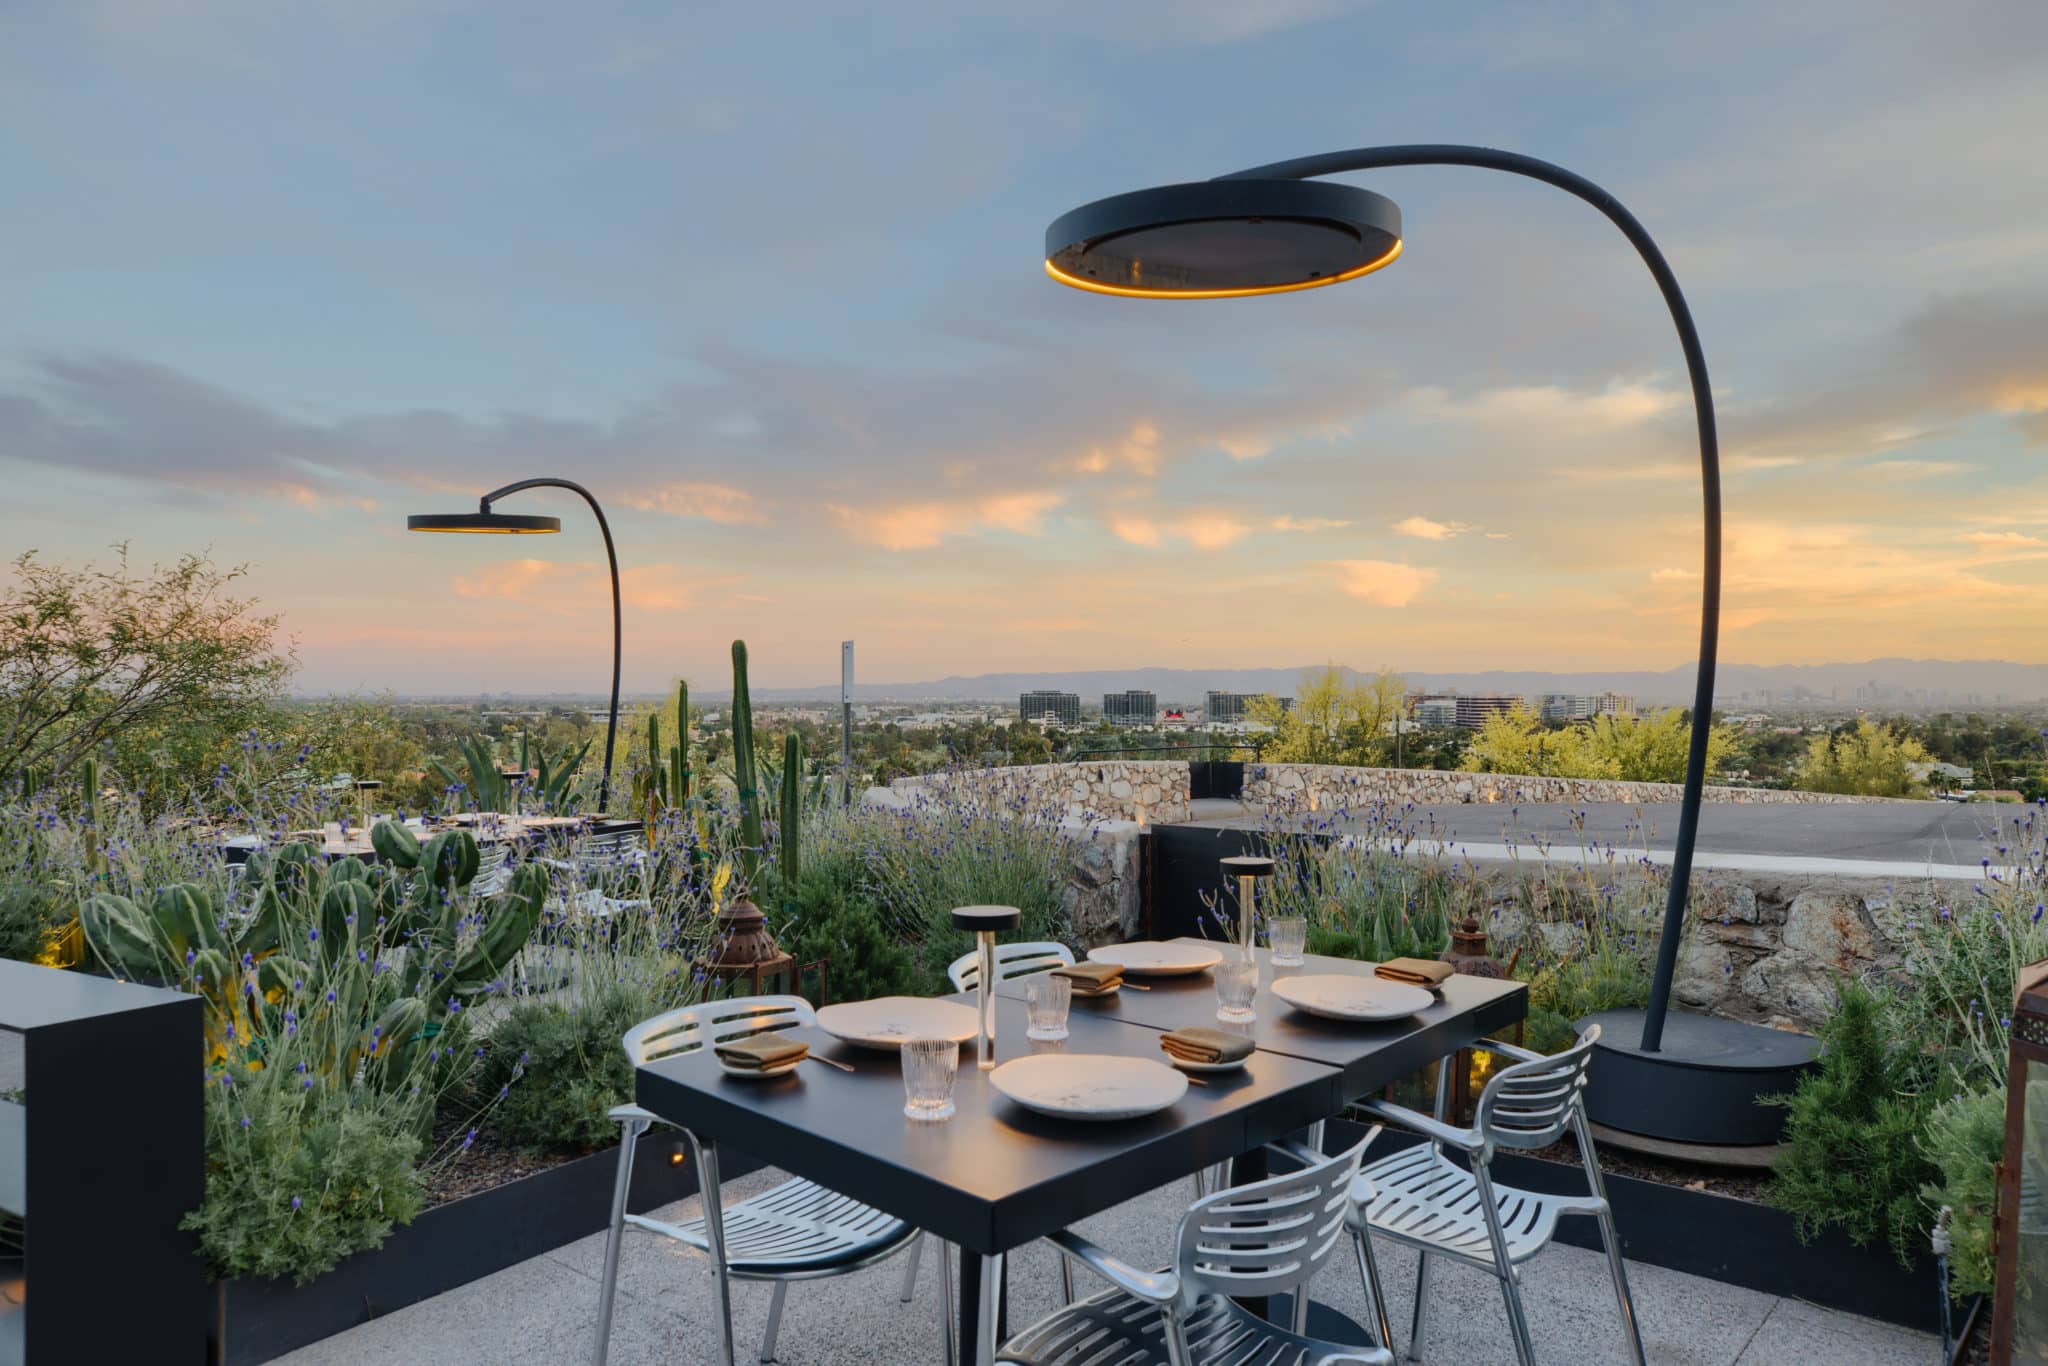 Bromic Natural Gas Patio Heaters vs. Propane: Which One is Right for You?